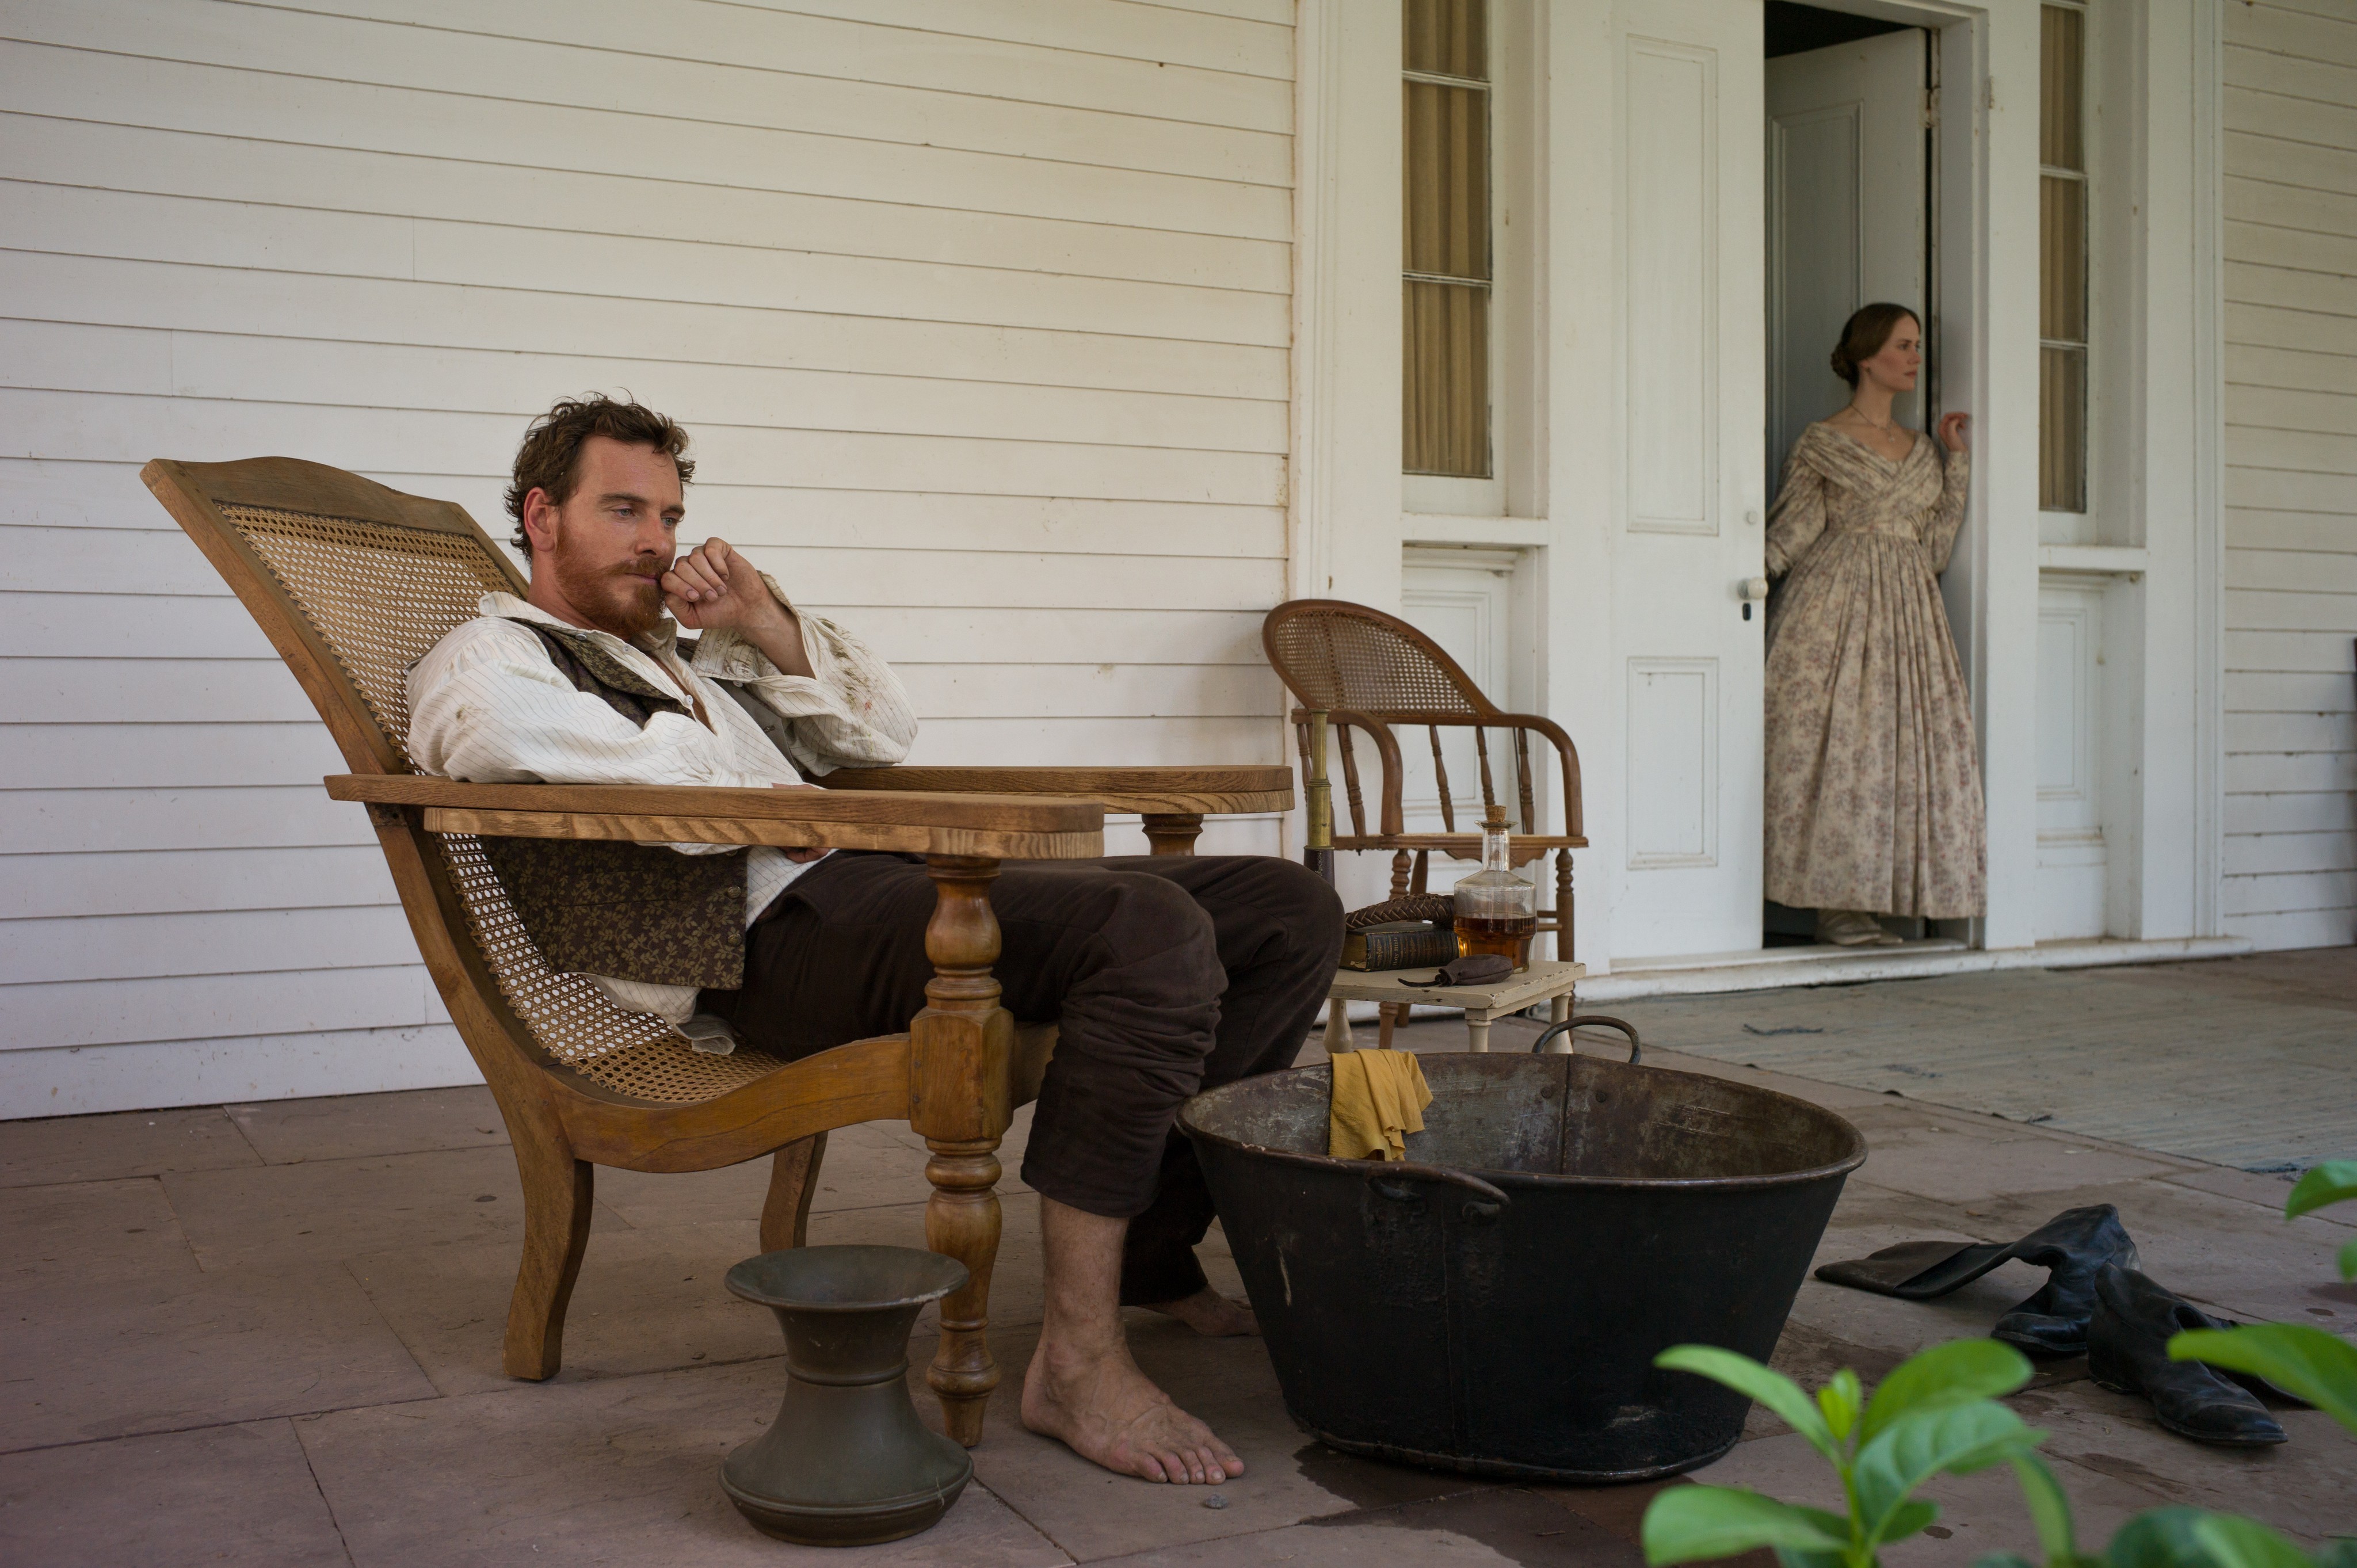 12 years a slave movie review rotten tomatoes